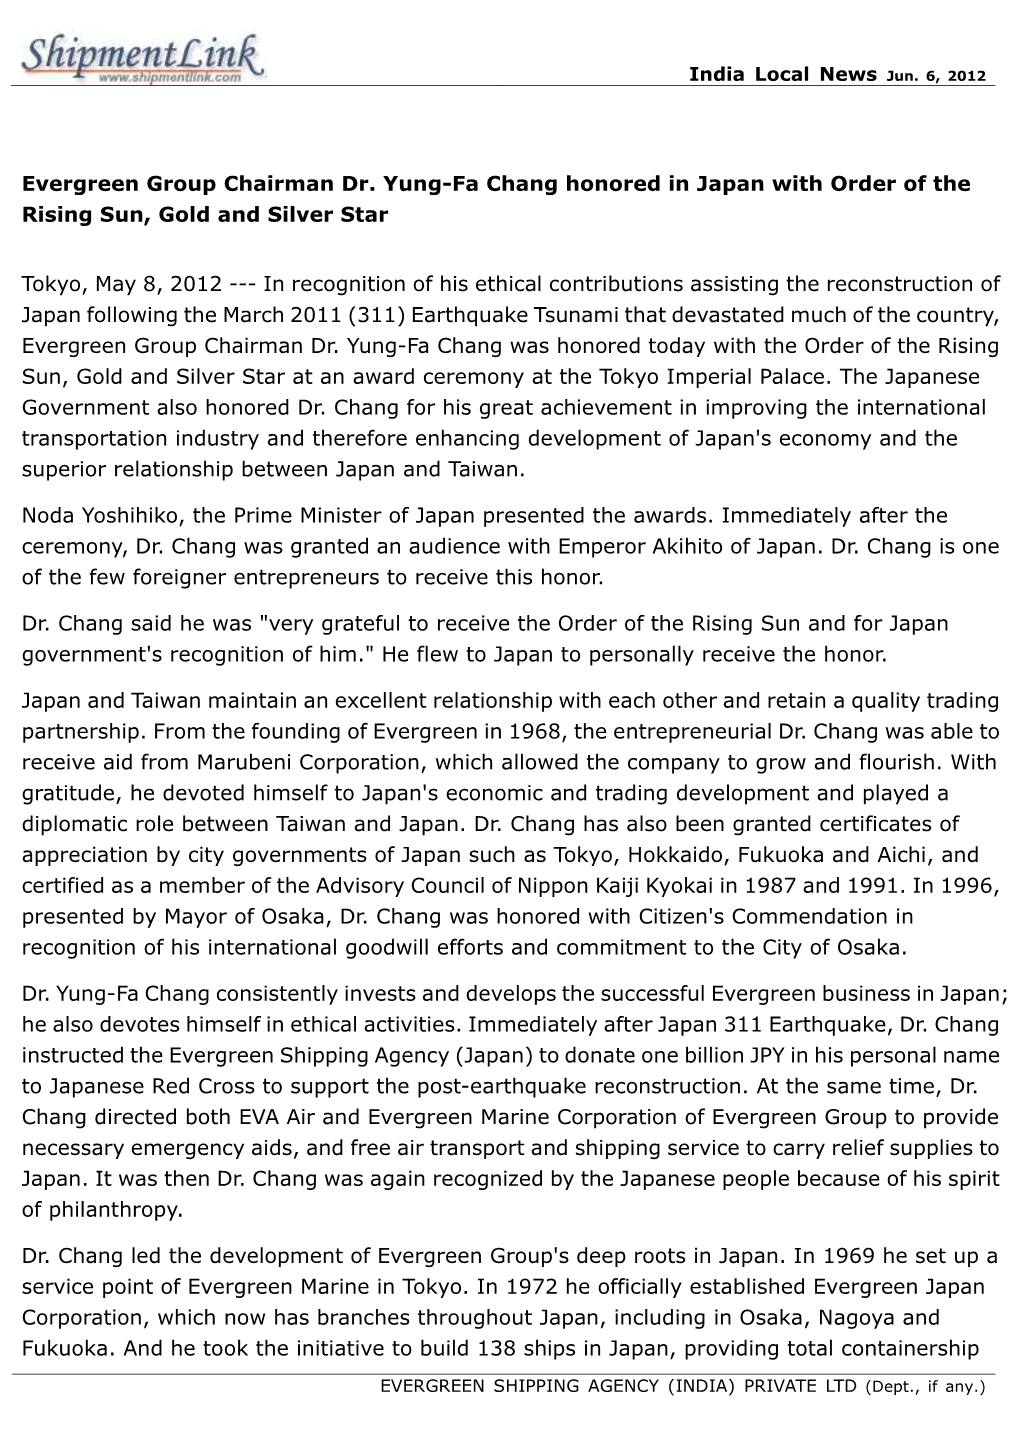 Evergreen Group Chairman Dr. Yung-Fa Chang Honored in Japan with Order of the Rising Sun, Gold and Silver Star